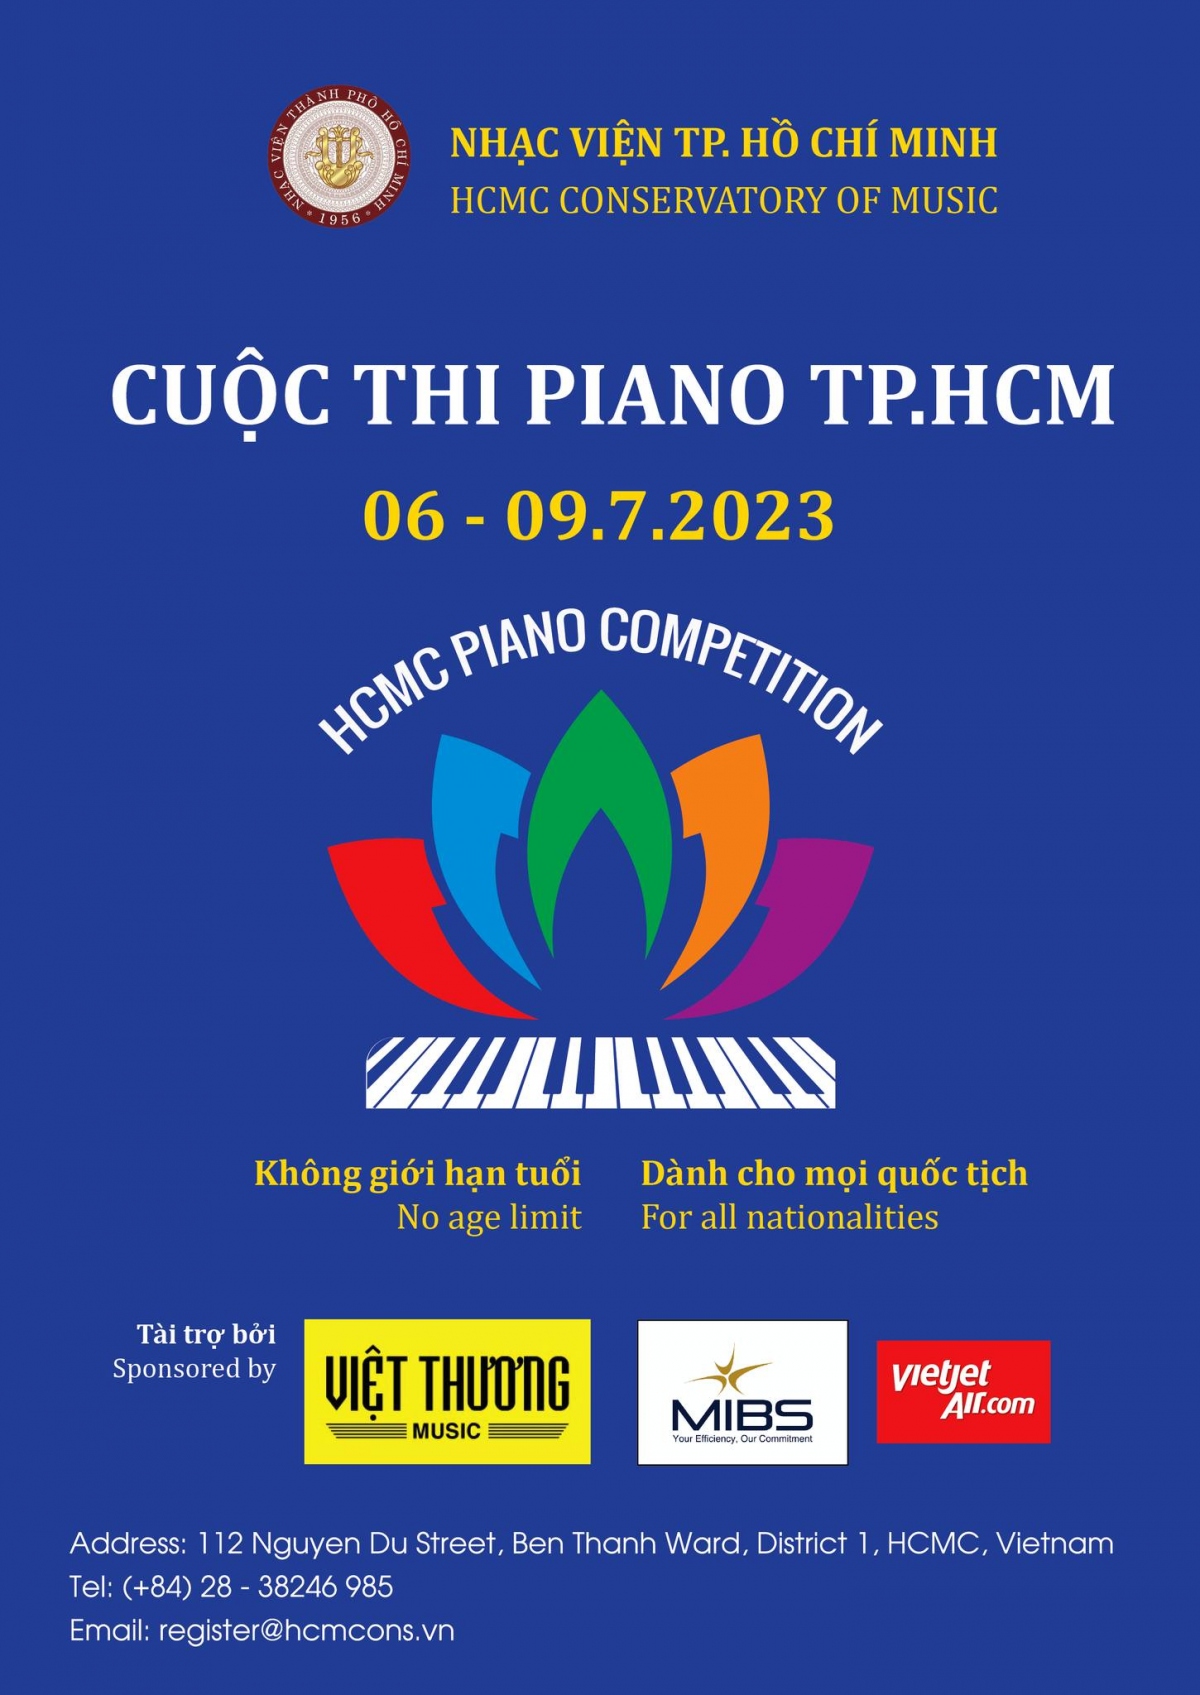 hcm city to host piano competition open to contestants of all nationalities picture 1